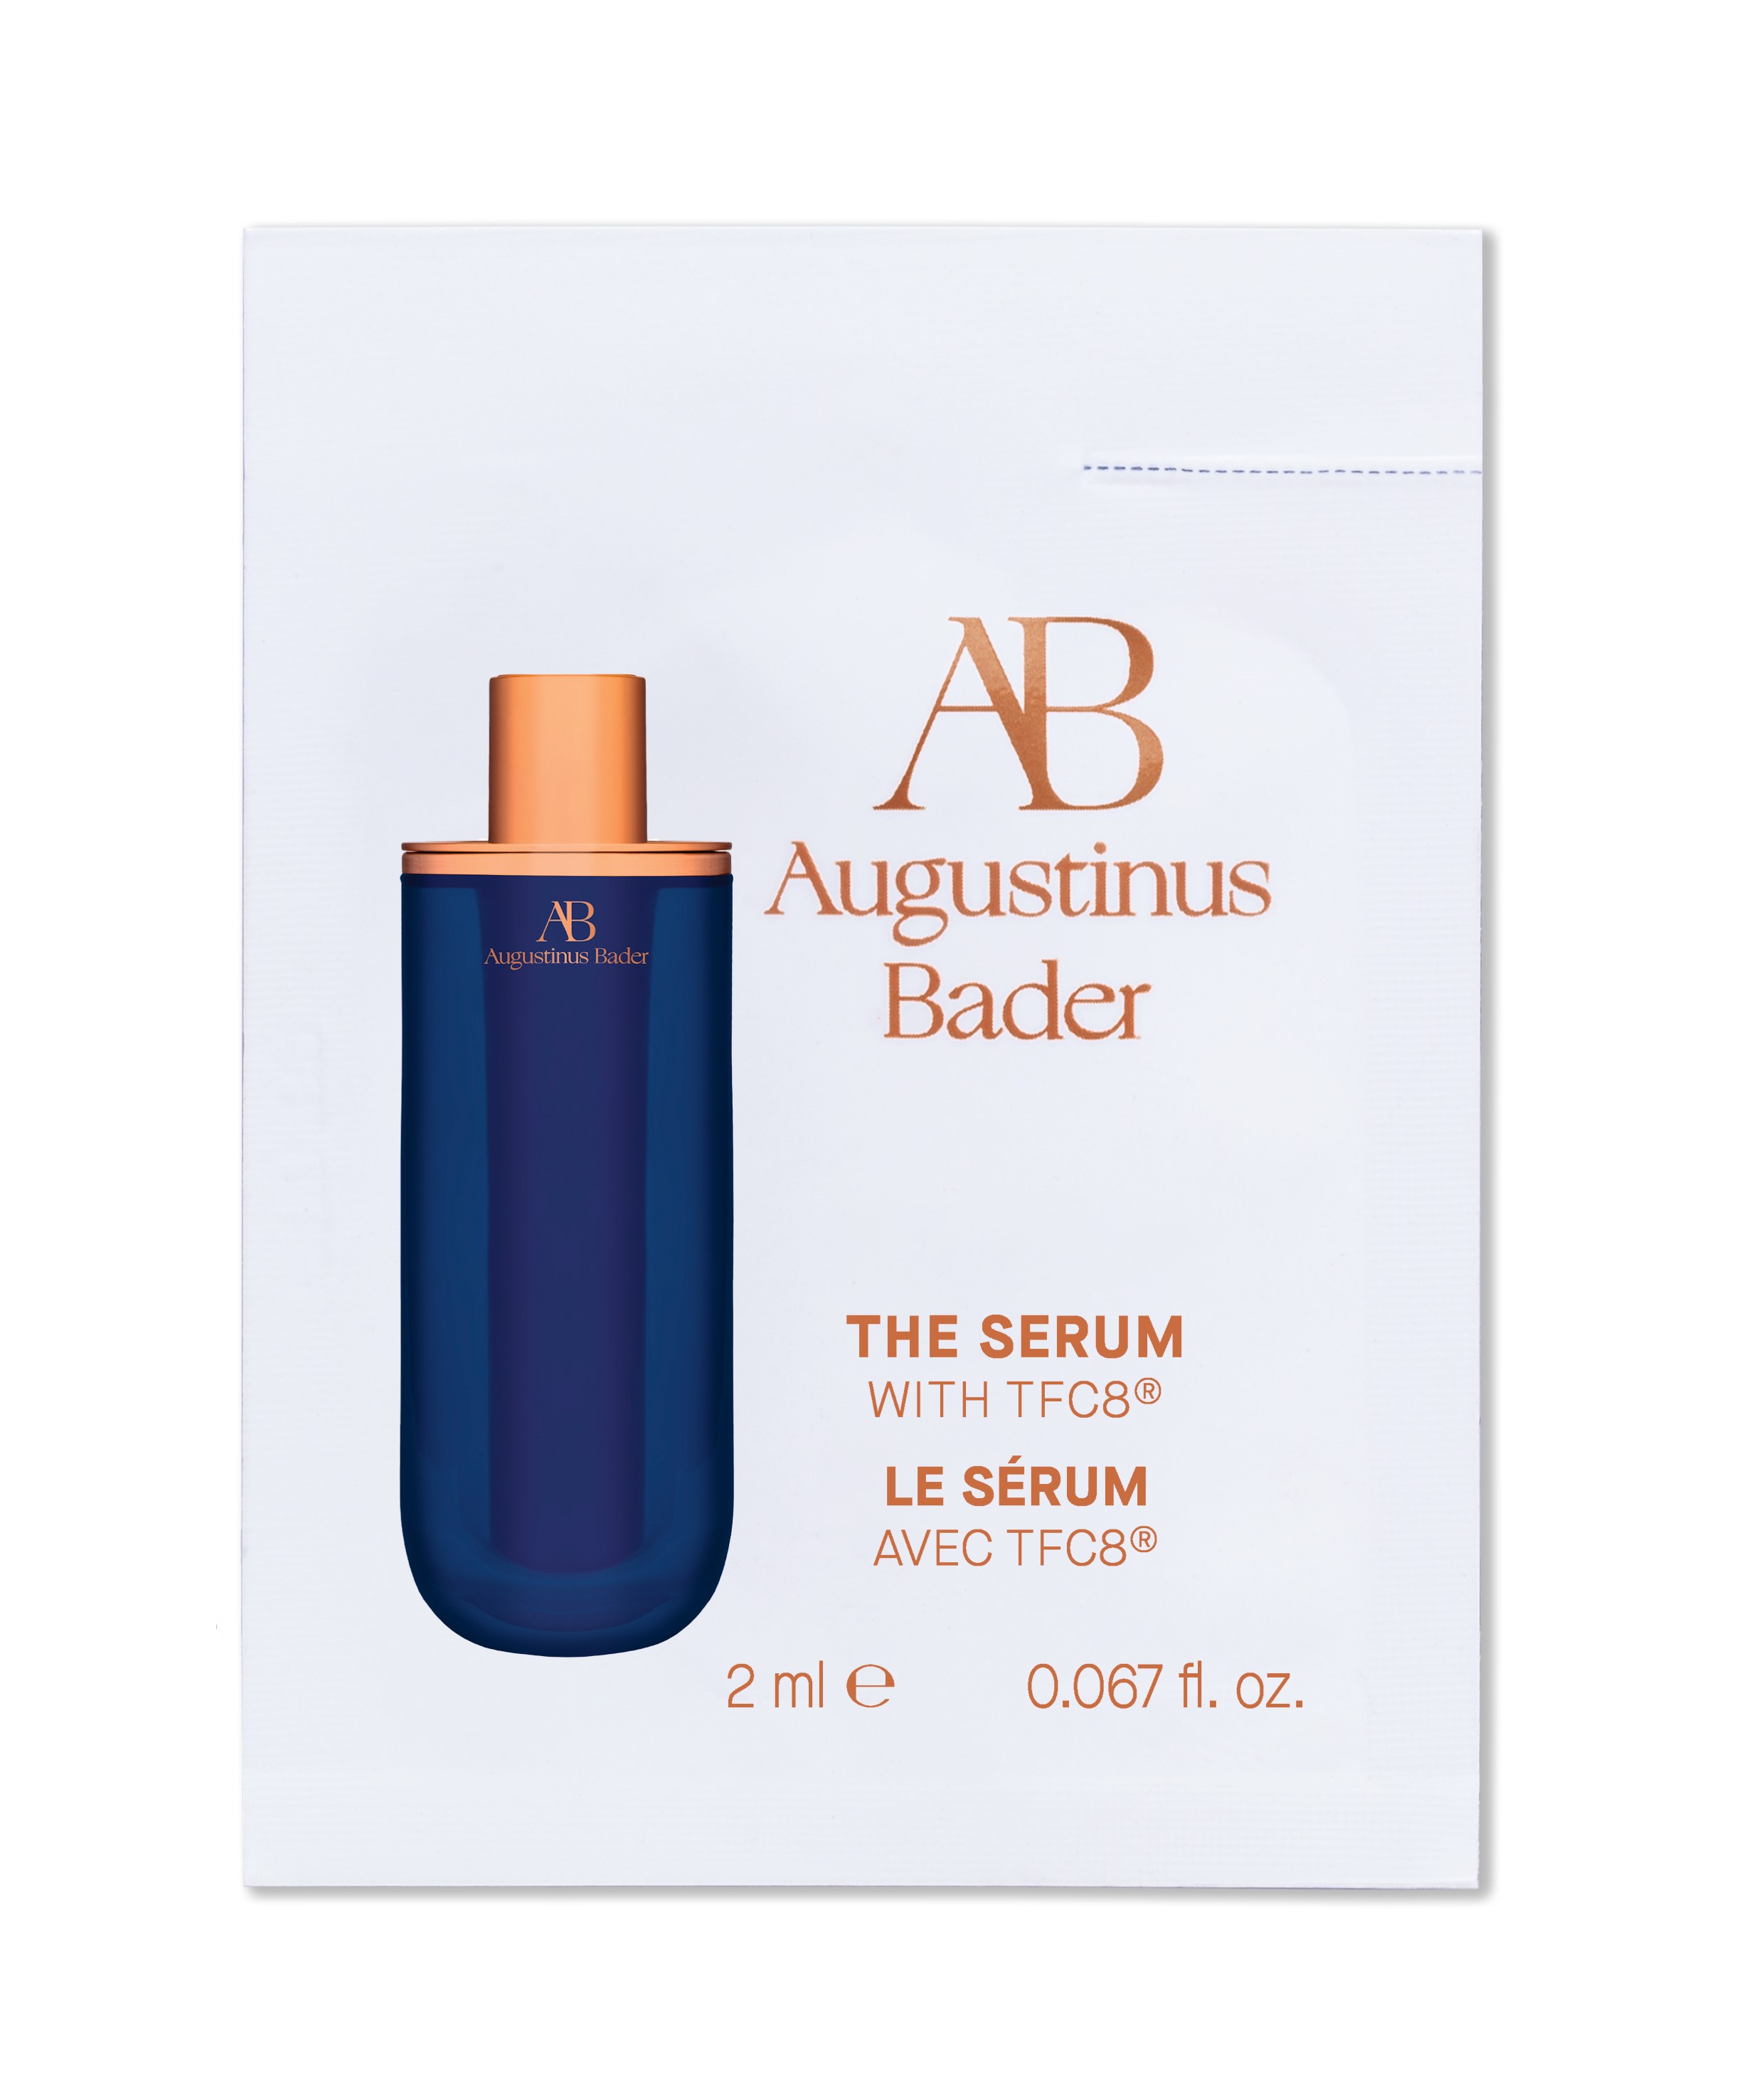 Purchase The Serum And Receive Sample Size To Try